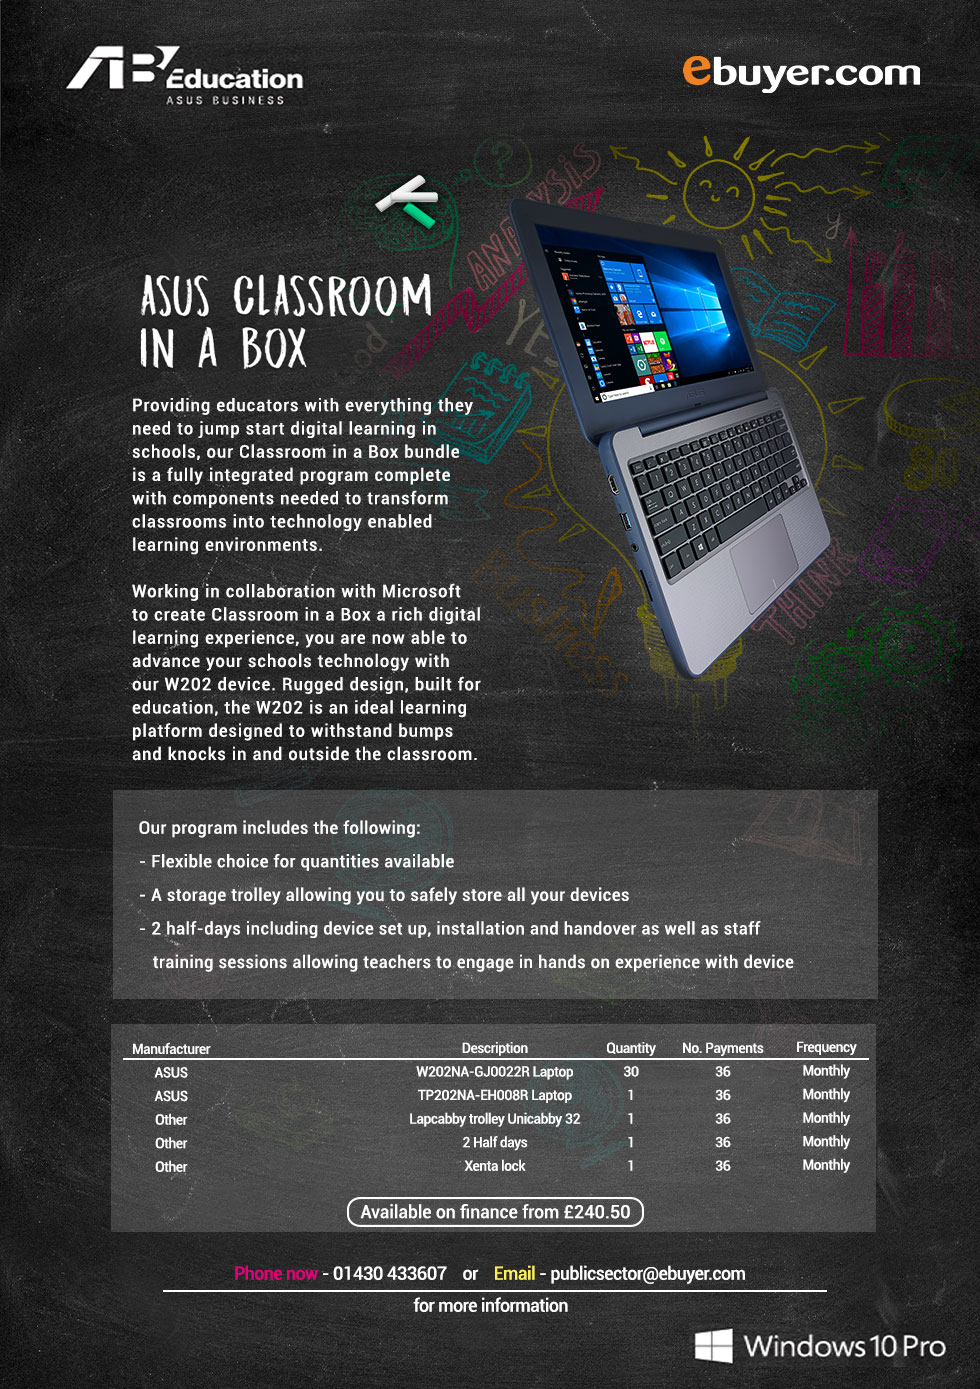 ASUS classroom in a box